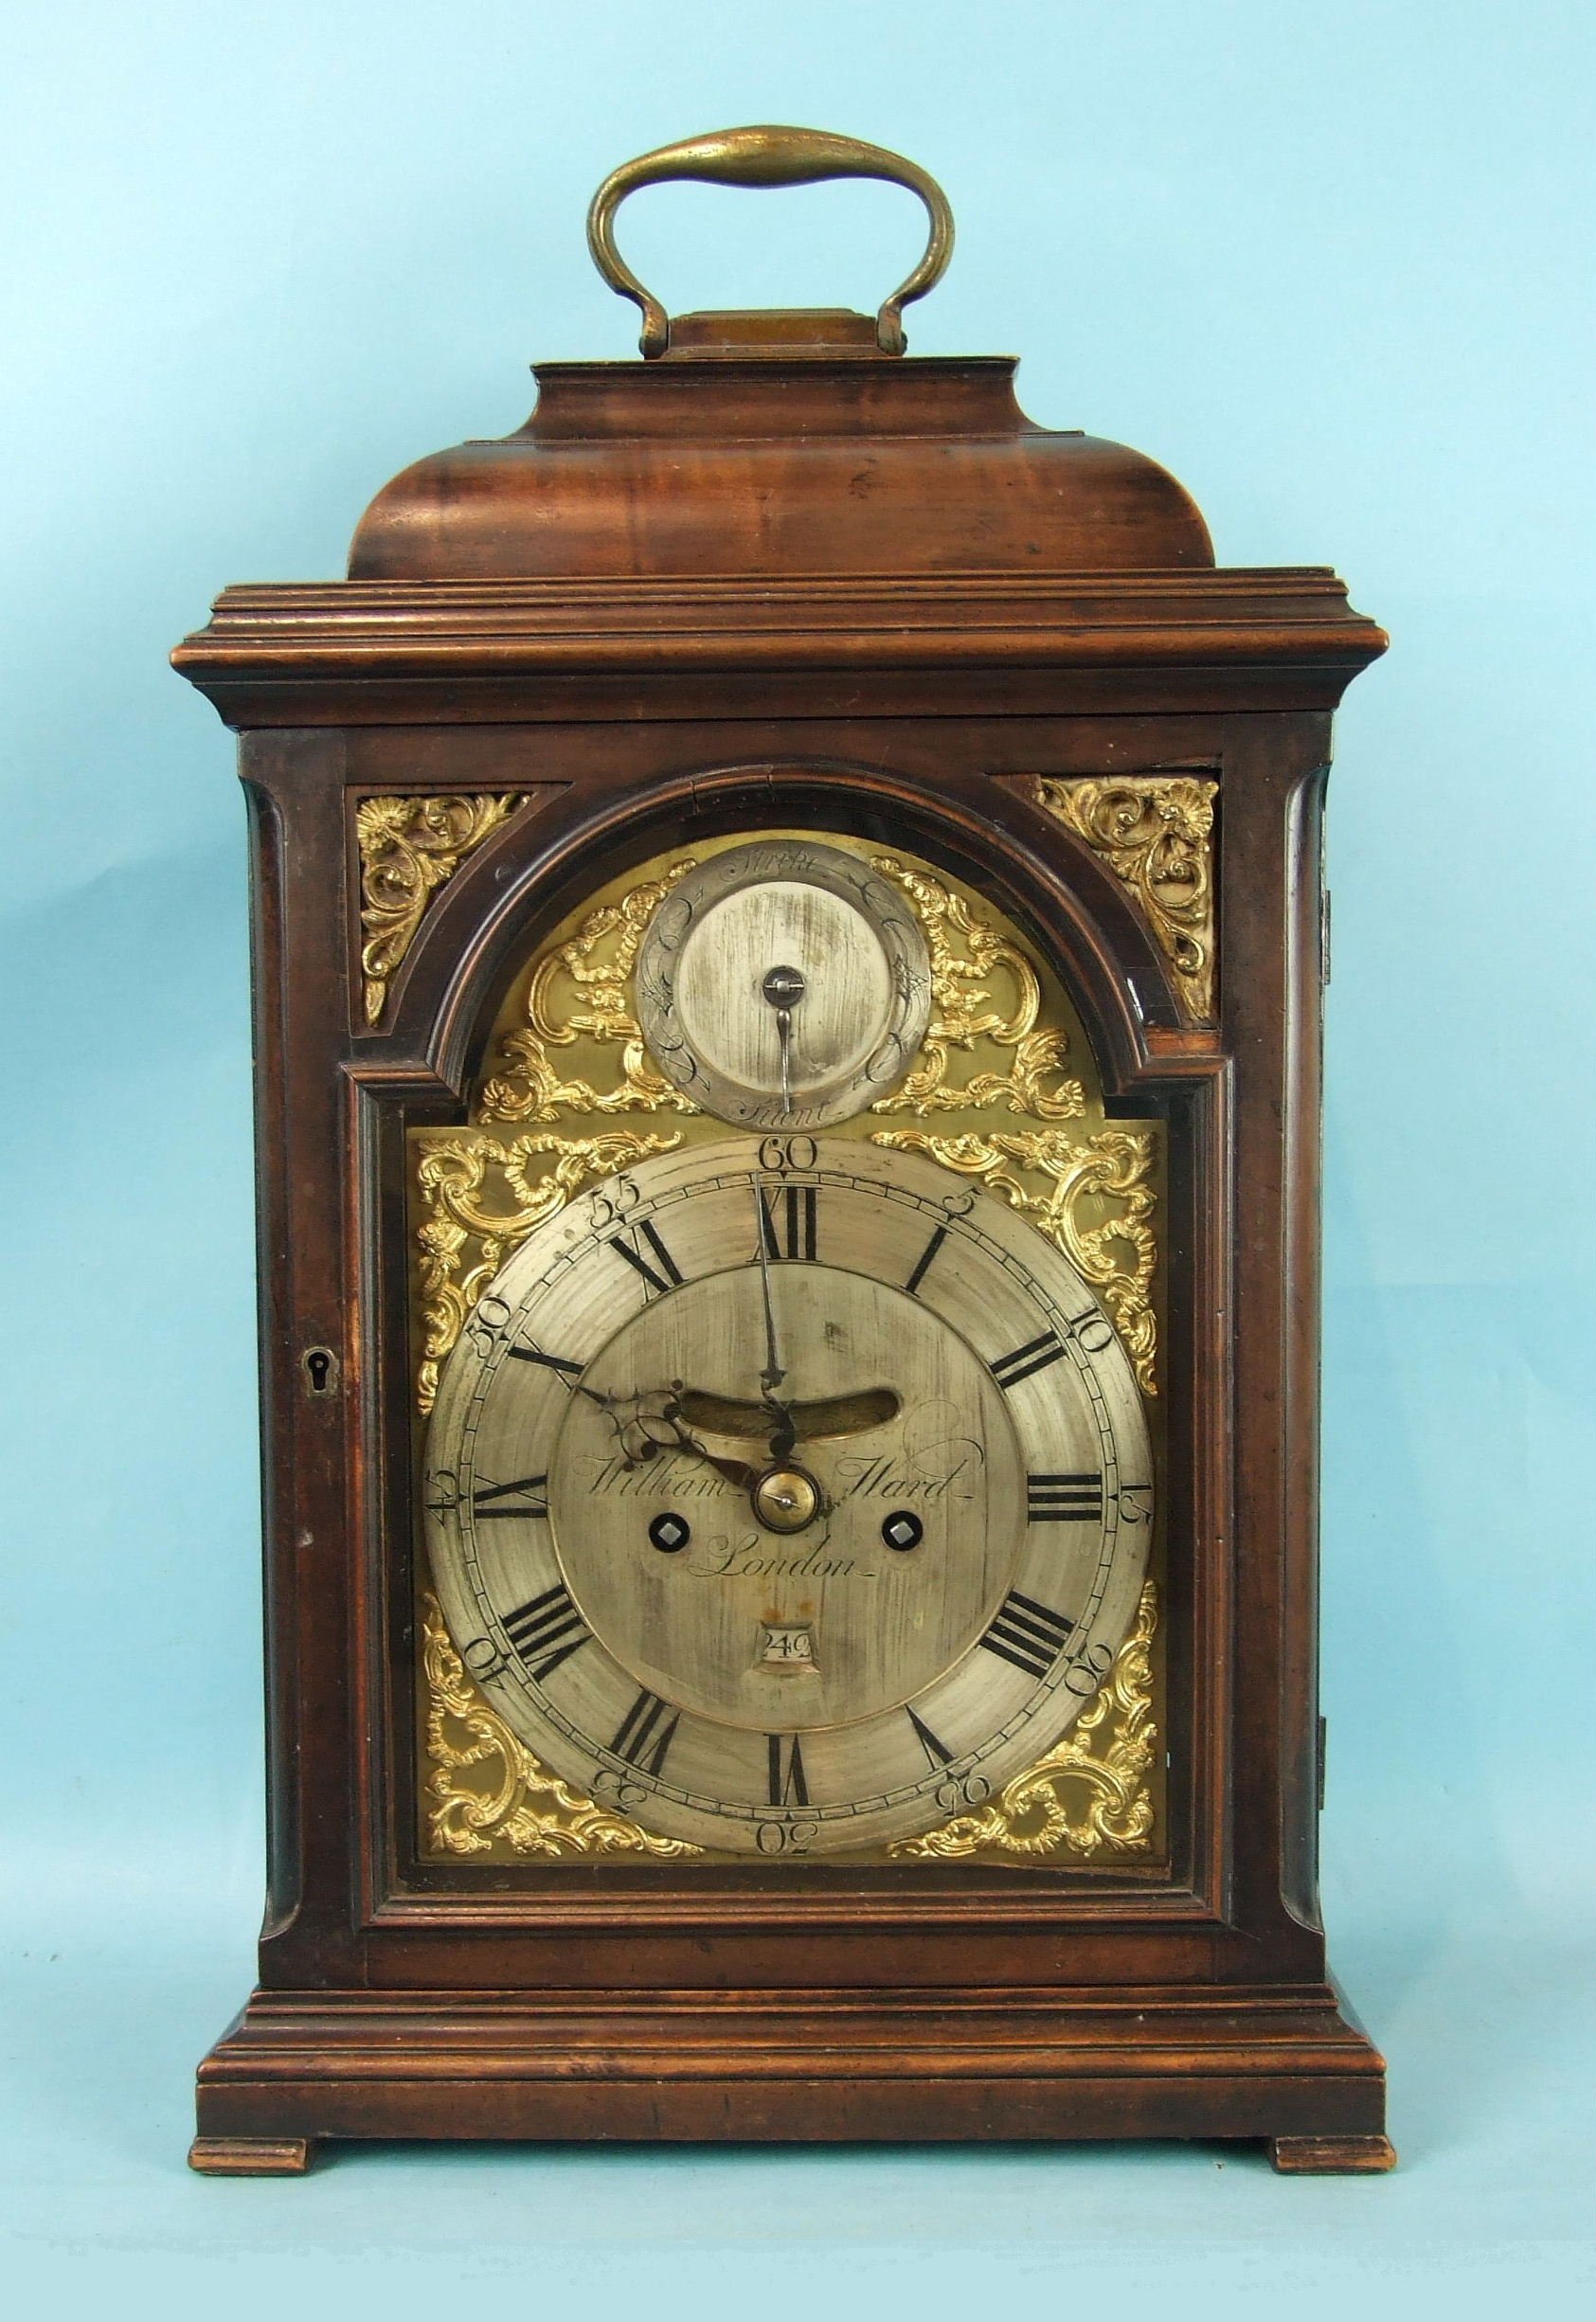 William Ward, London, a late-18th century mahogany bracket clock, the caddy-top case with brass